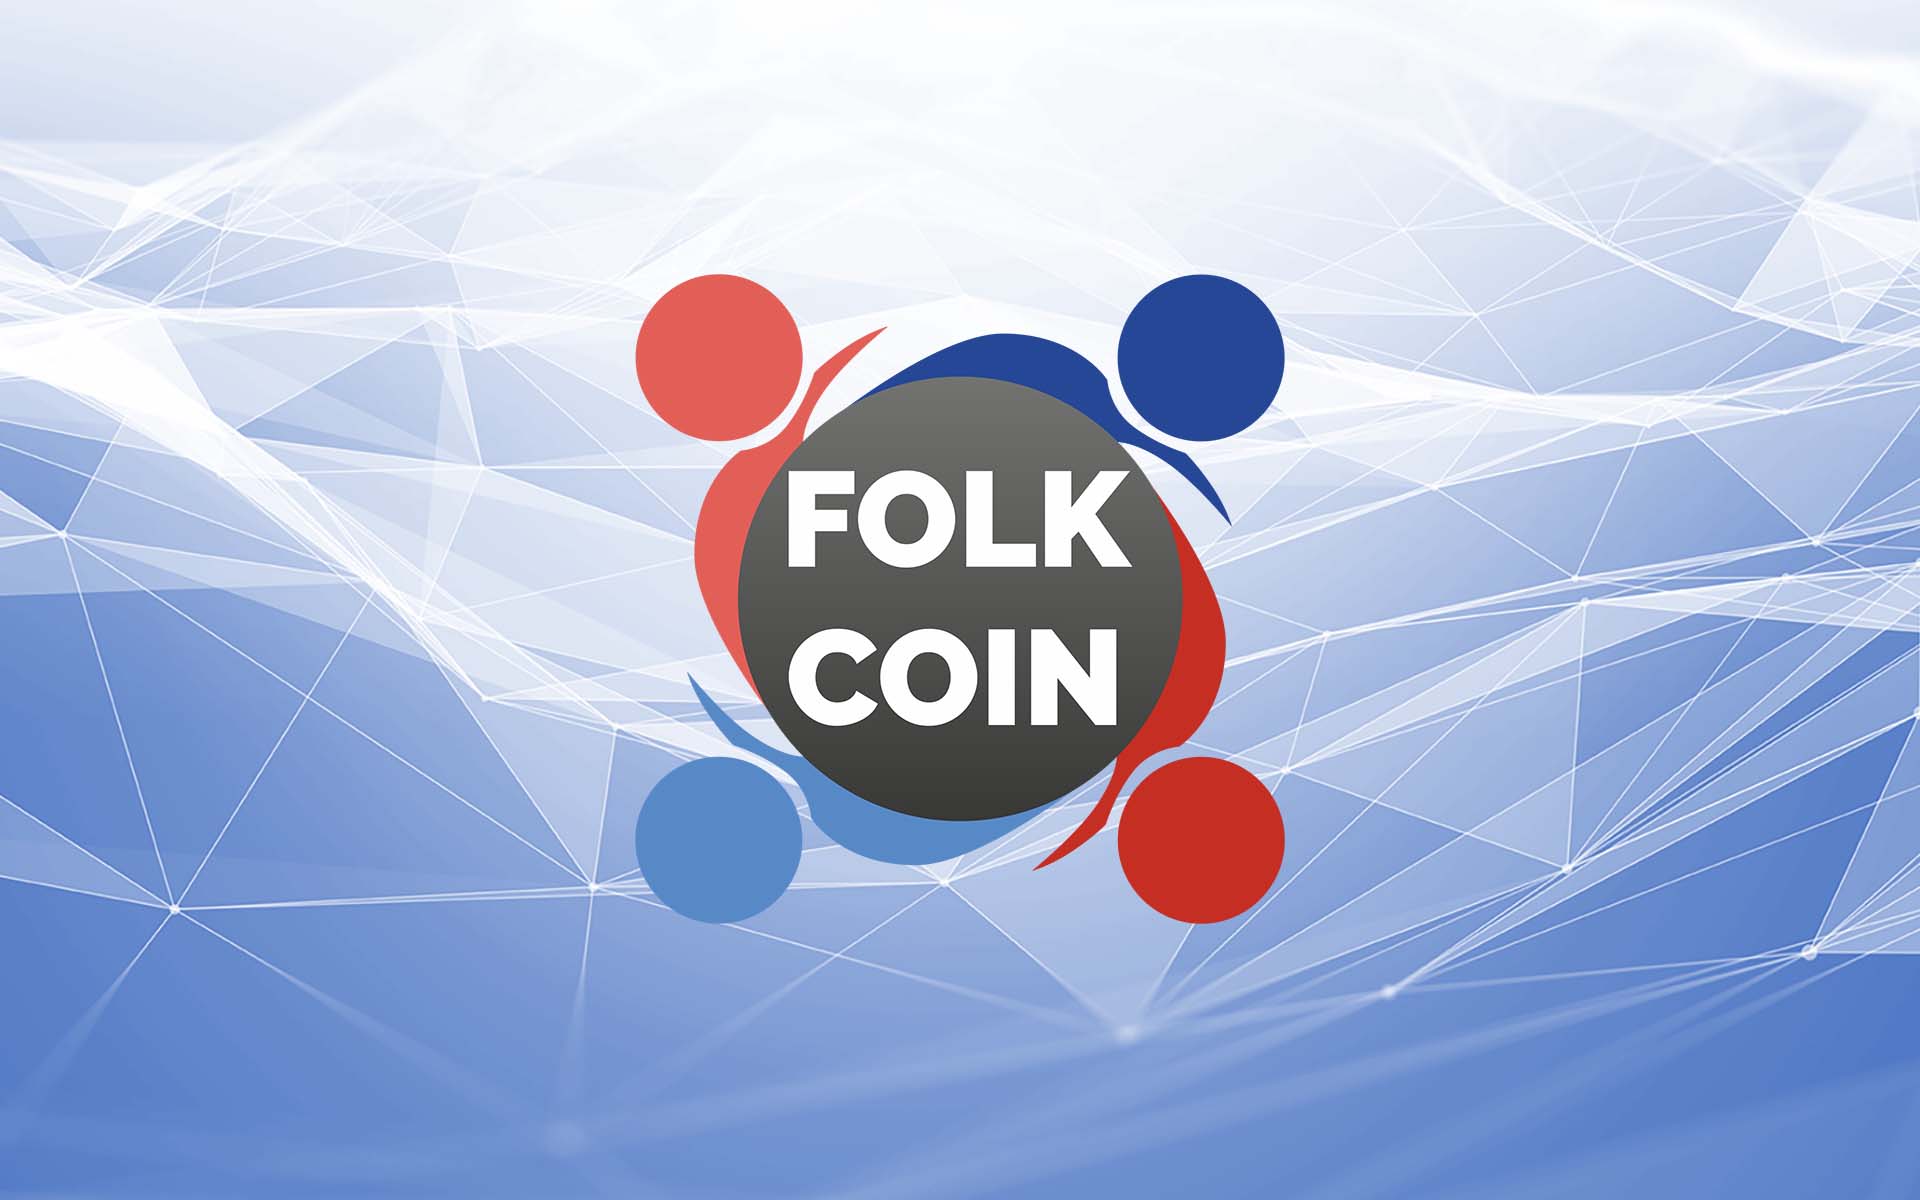 ICO Campaign Starts for FOLK COIN, a Cryptocurrency Created to Maximize the Benefits of People and Companies